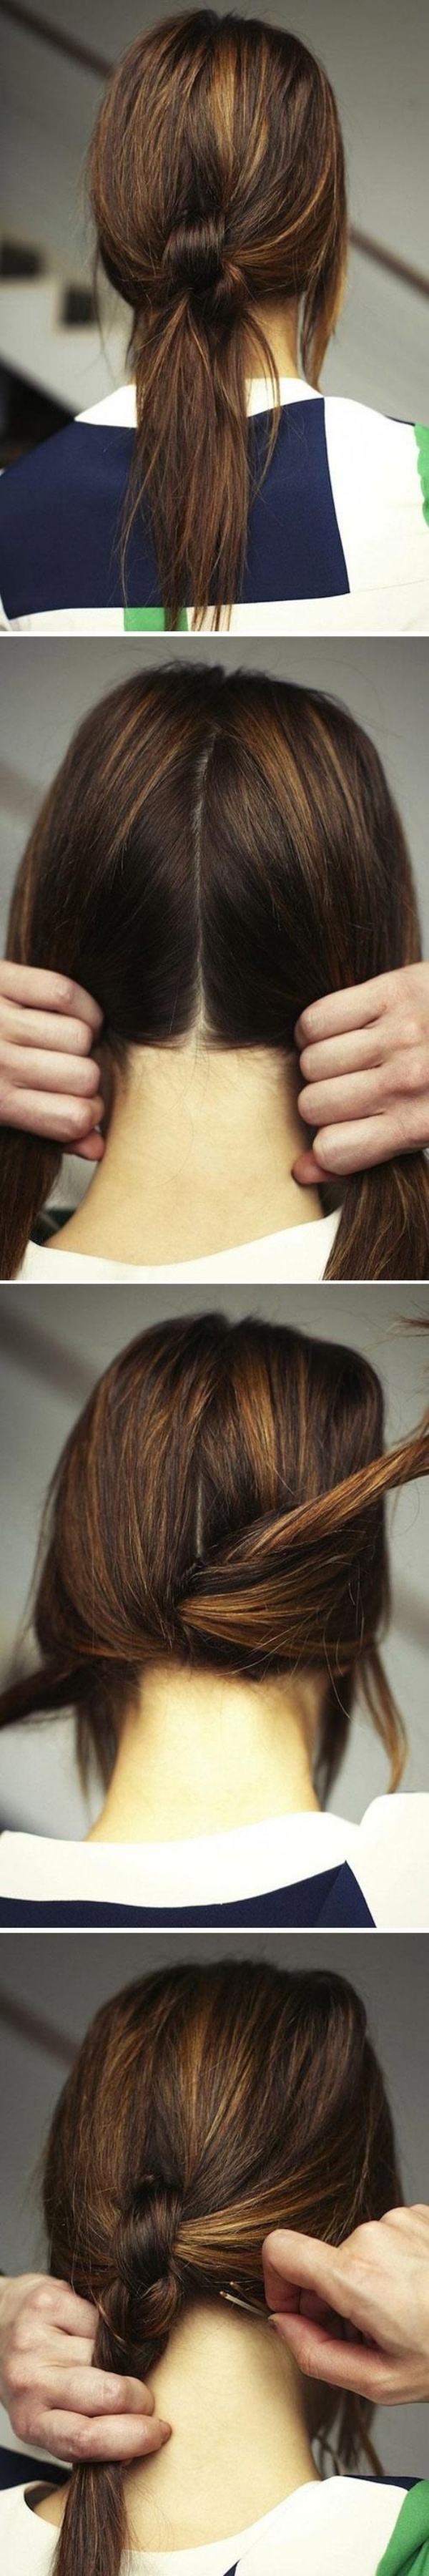 Simple Five Minute Hairstyles00007